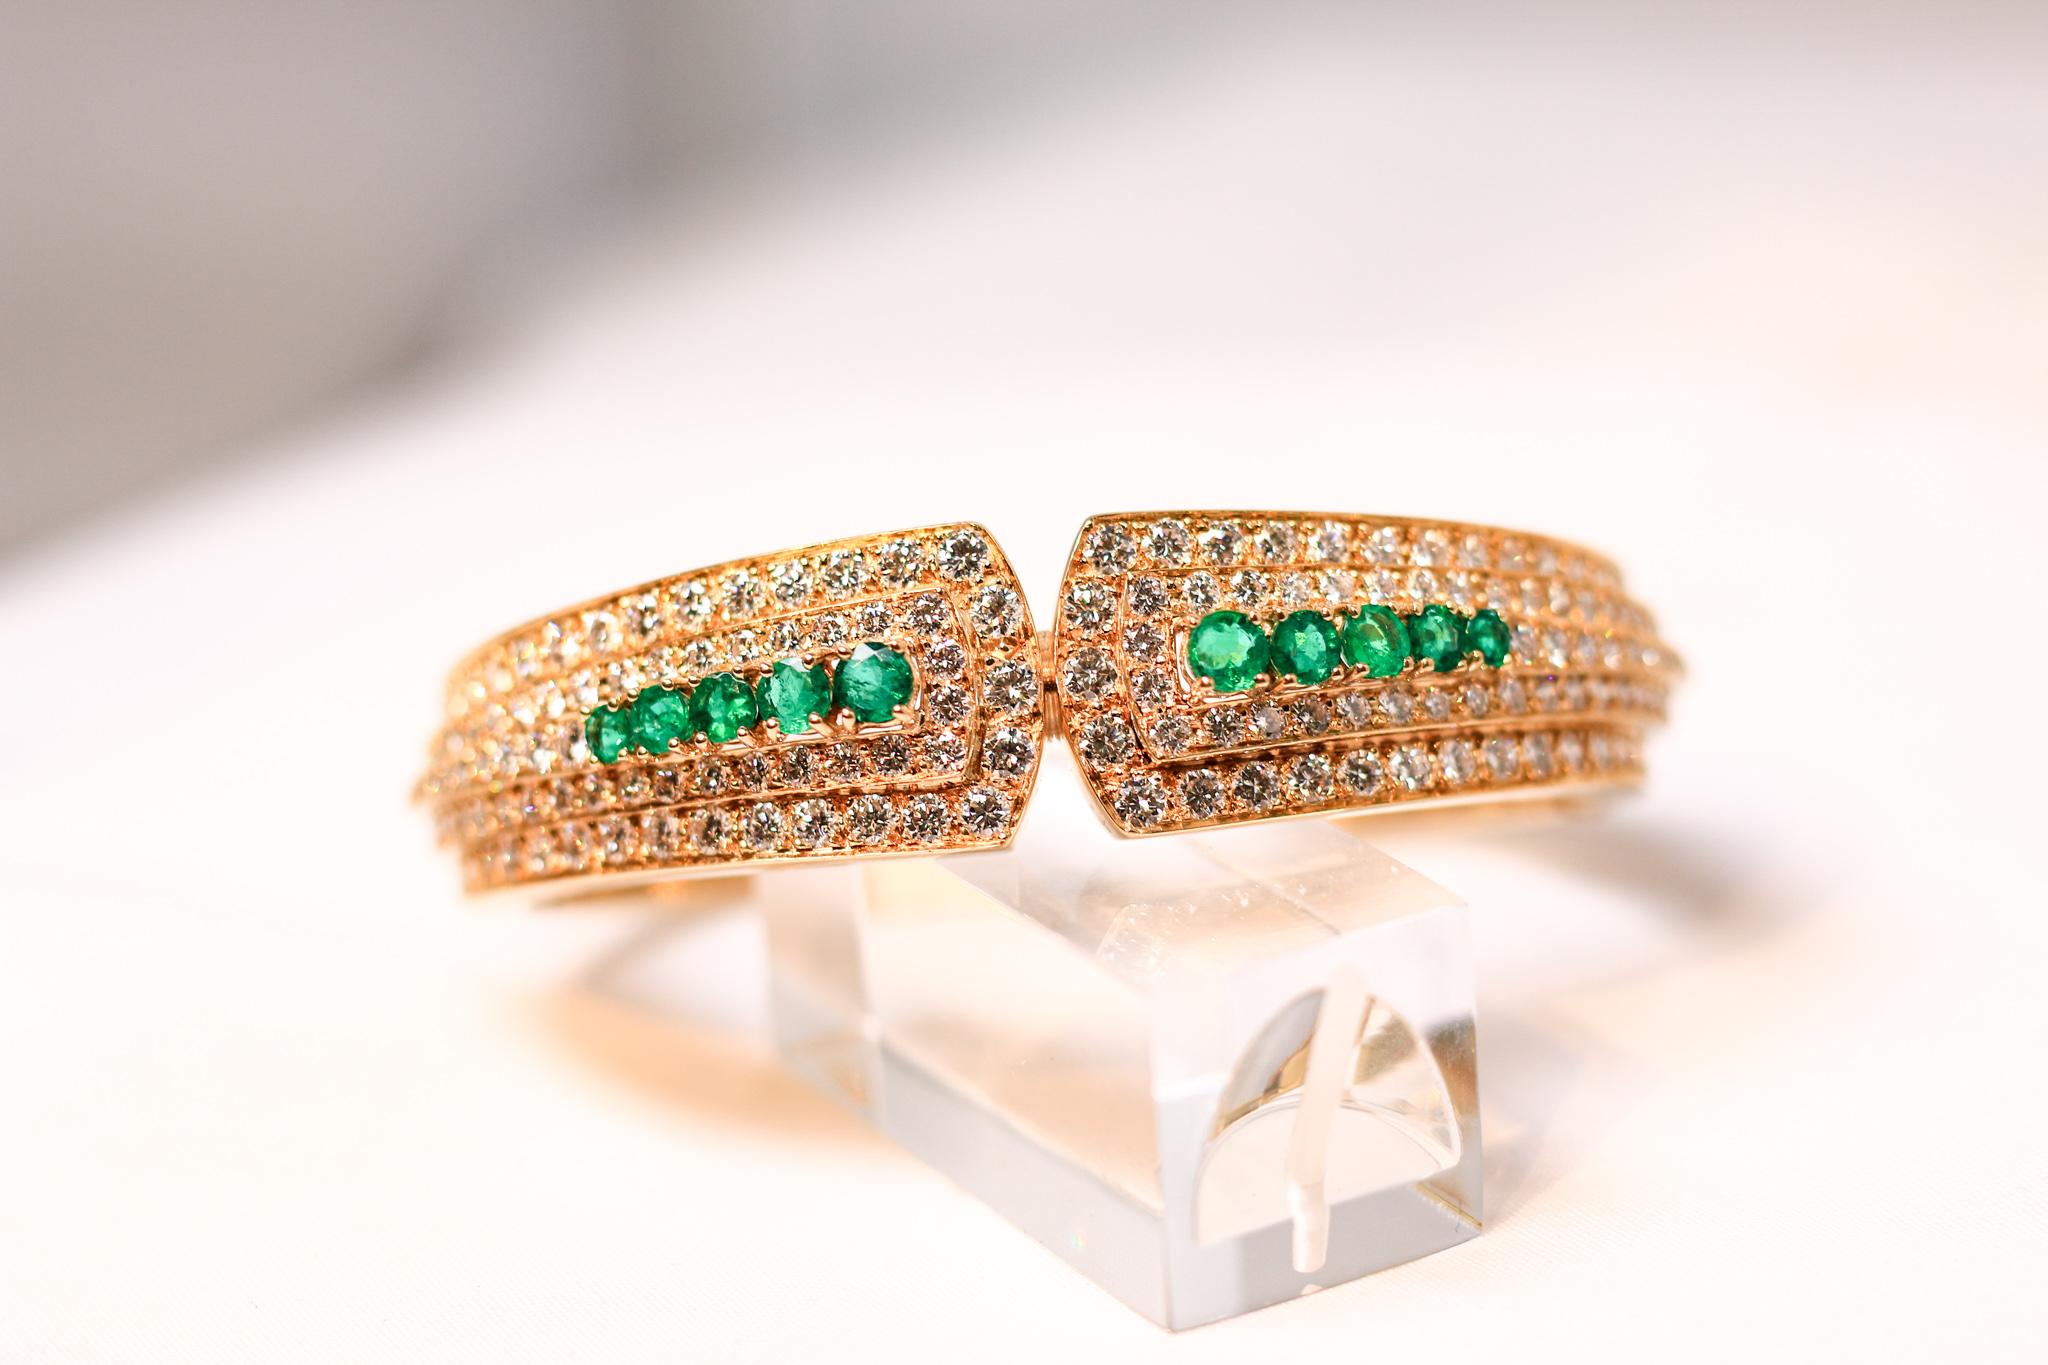 18 K Yellow Gold Pave Bangle Bracelet with Emeralds.  Hinged Clasp and Safety Chain.  Stamped 750.Fits standard size 7 inch wrist. This piece is stunning.  10 graduated emeralds.  